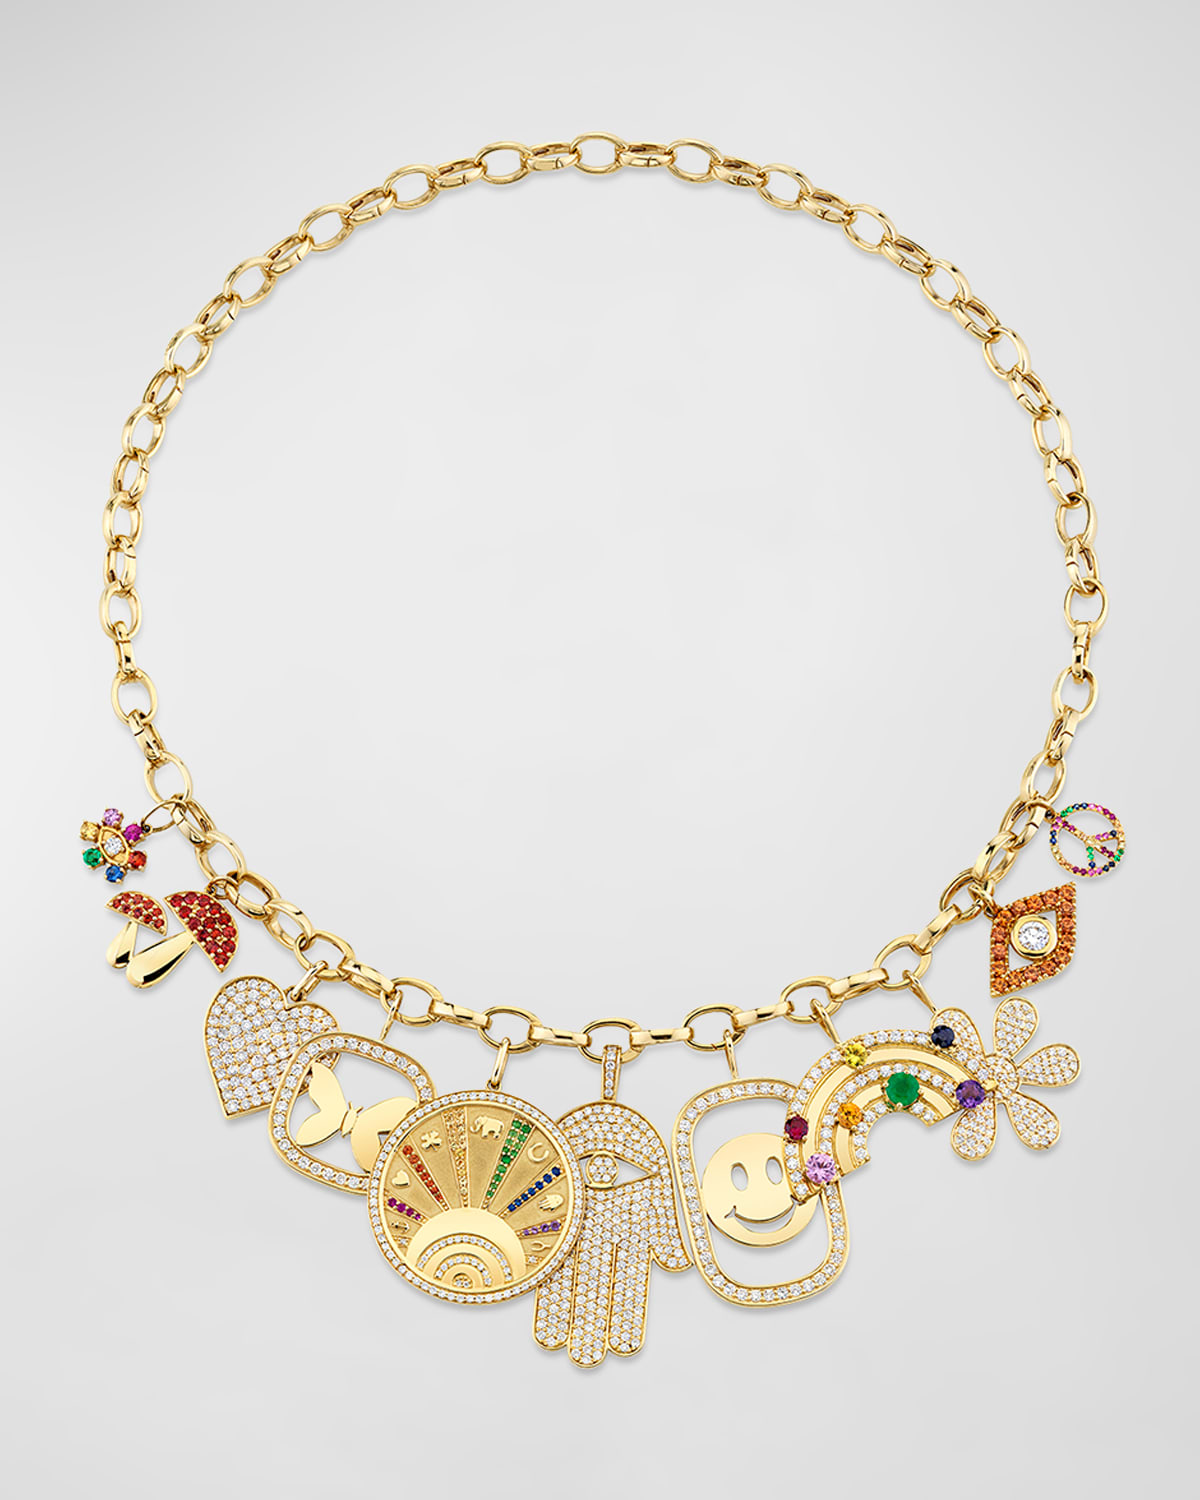 Sydney Evan | Shop Sydney Evan 14K Gold & Enamel Tiny Charms Rainbow Zircon Necklace from The Little Loves Collection